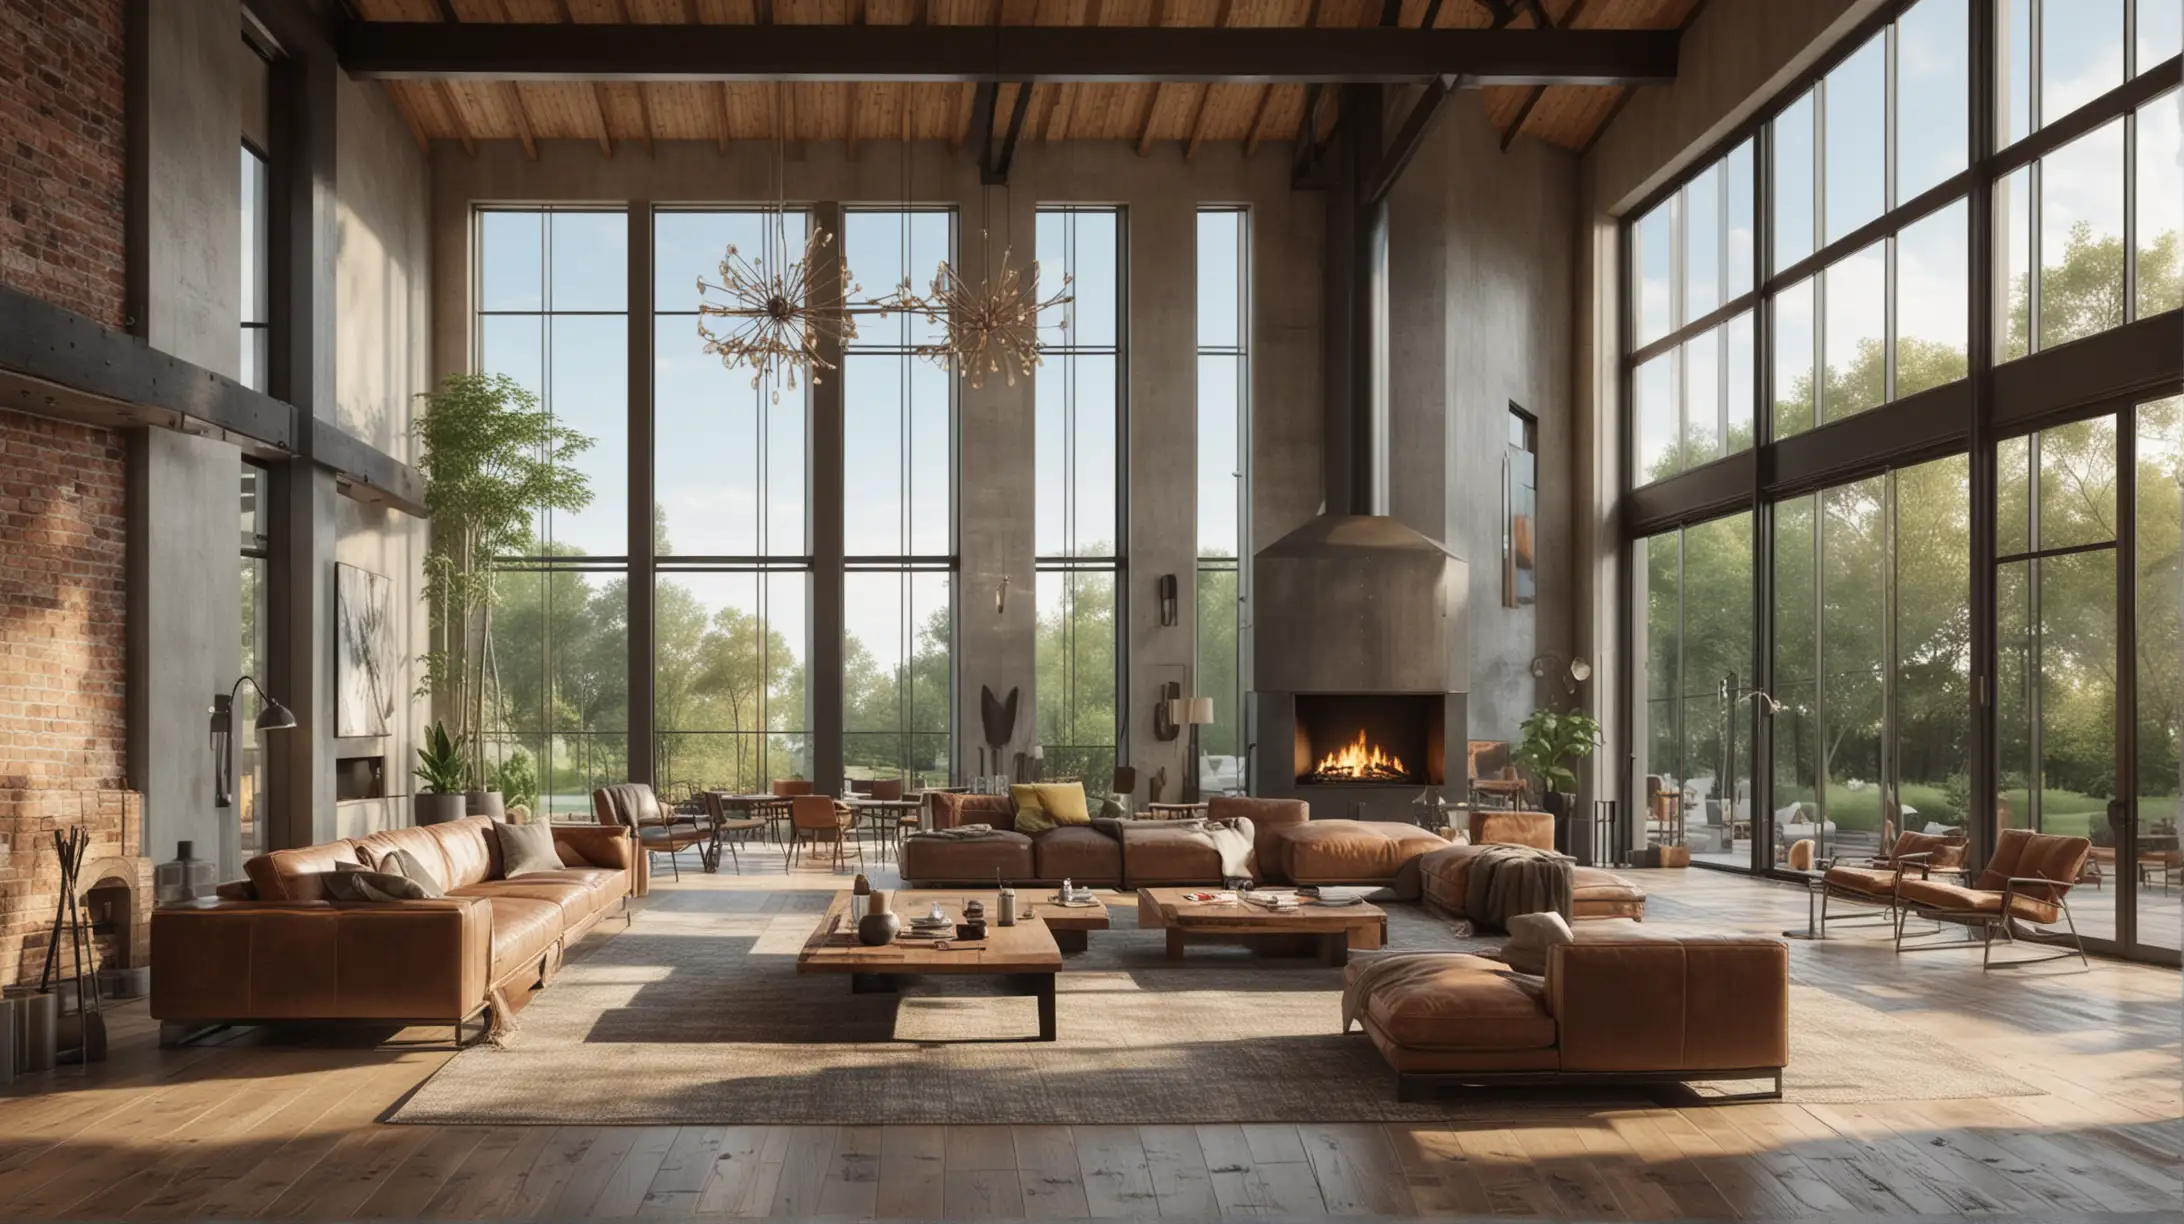 A high-ceiling industrial-style living room with exposed wooden beams, a stand-alone fireplace, and one huge two-story glass picture window with no panes that takes up the entire wall, modern furnishings. Photographic quality, highly detailed, cinematic lighting.